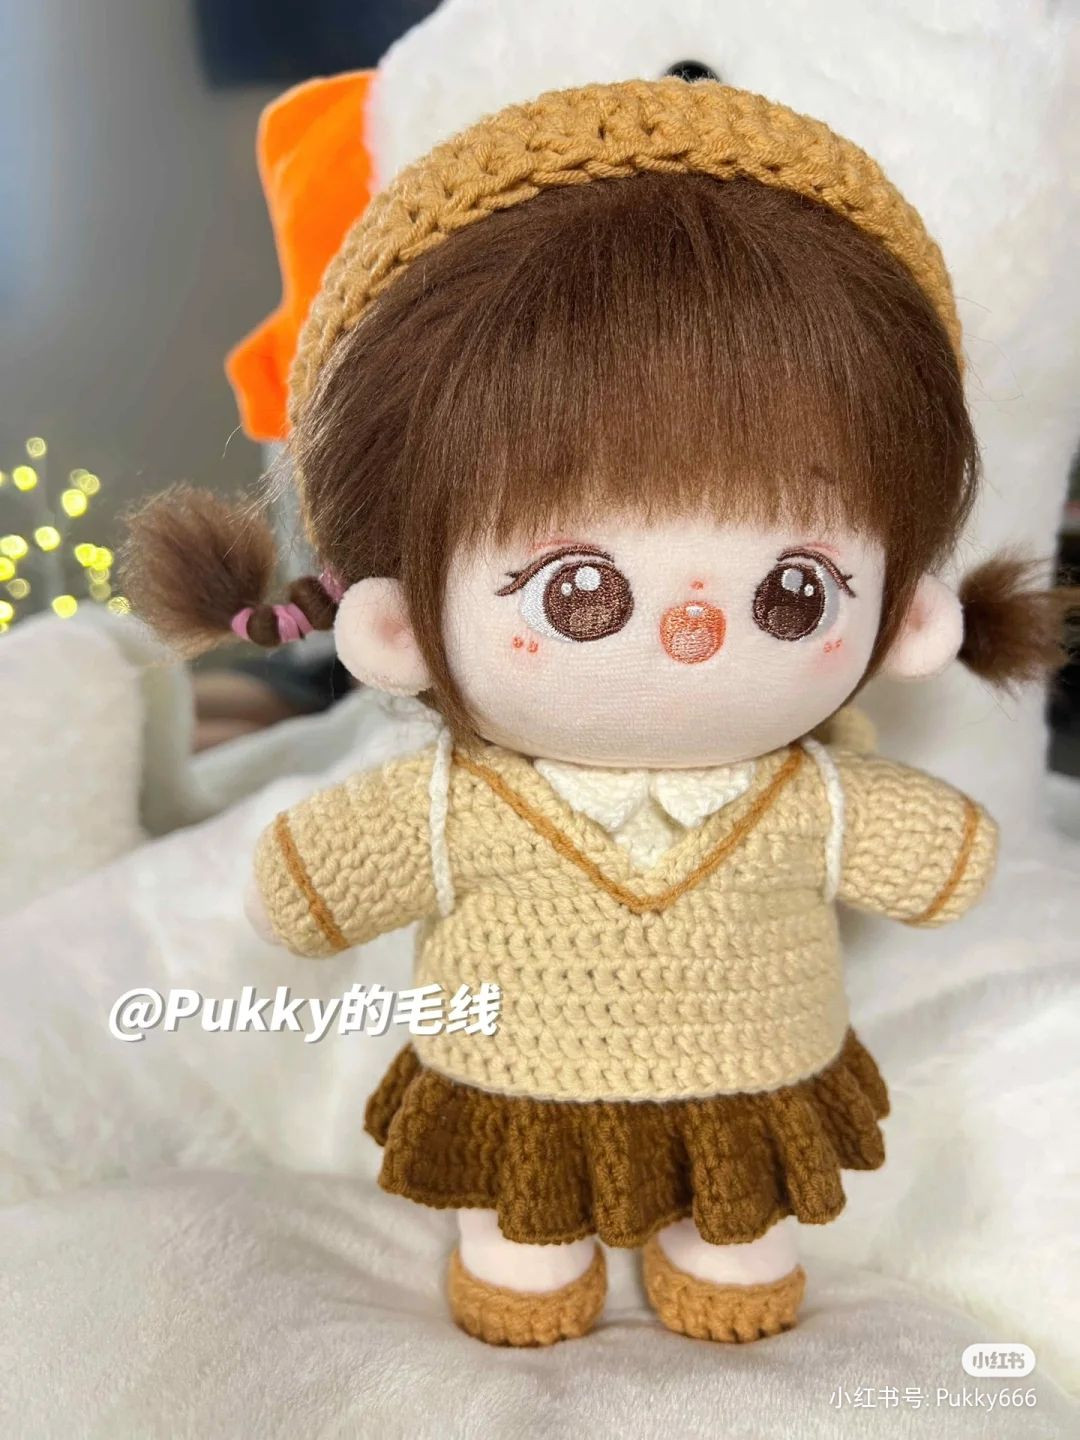 Brown-haired girl doll wearing a brown beanie and a brown dress.